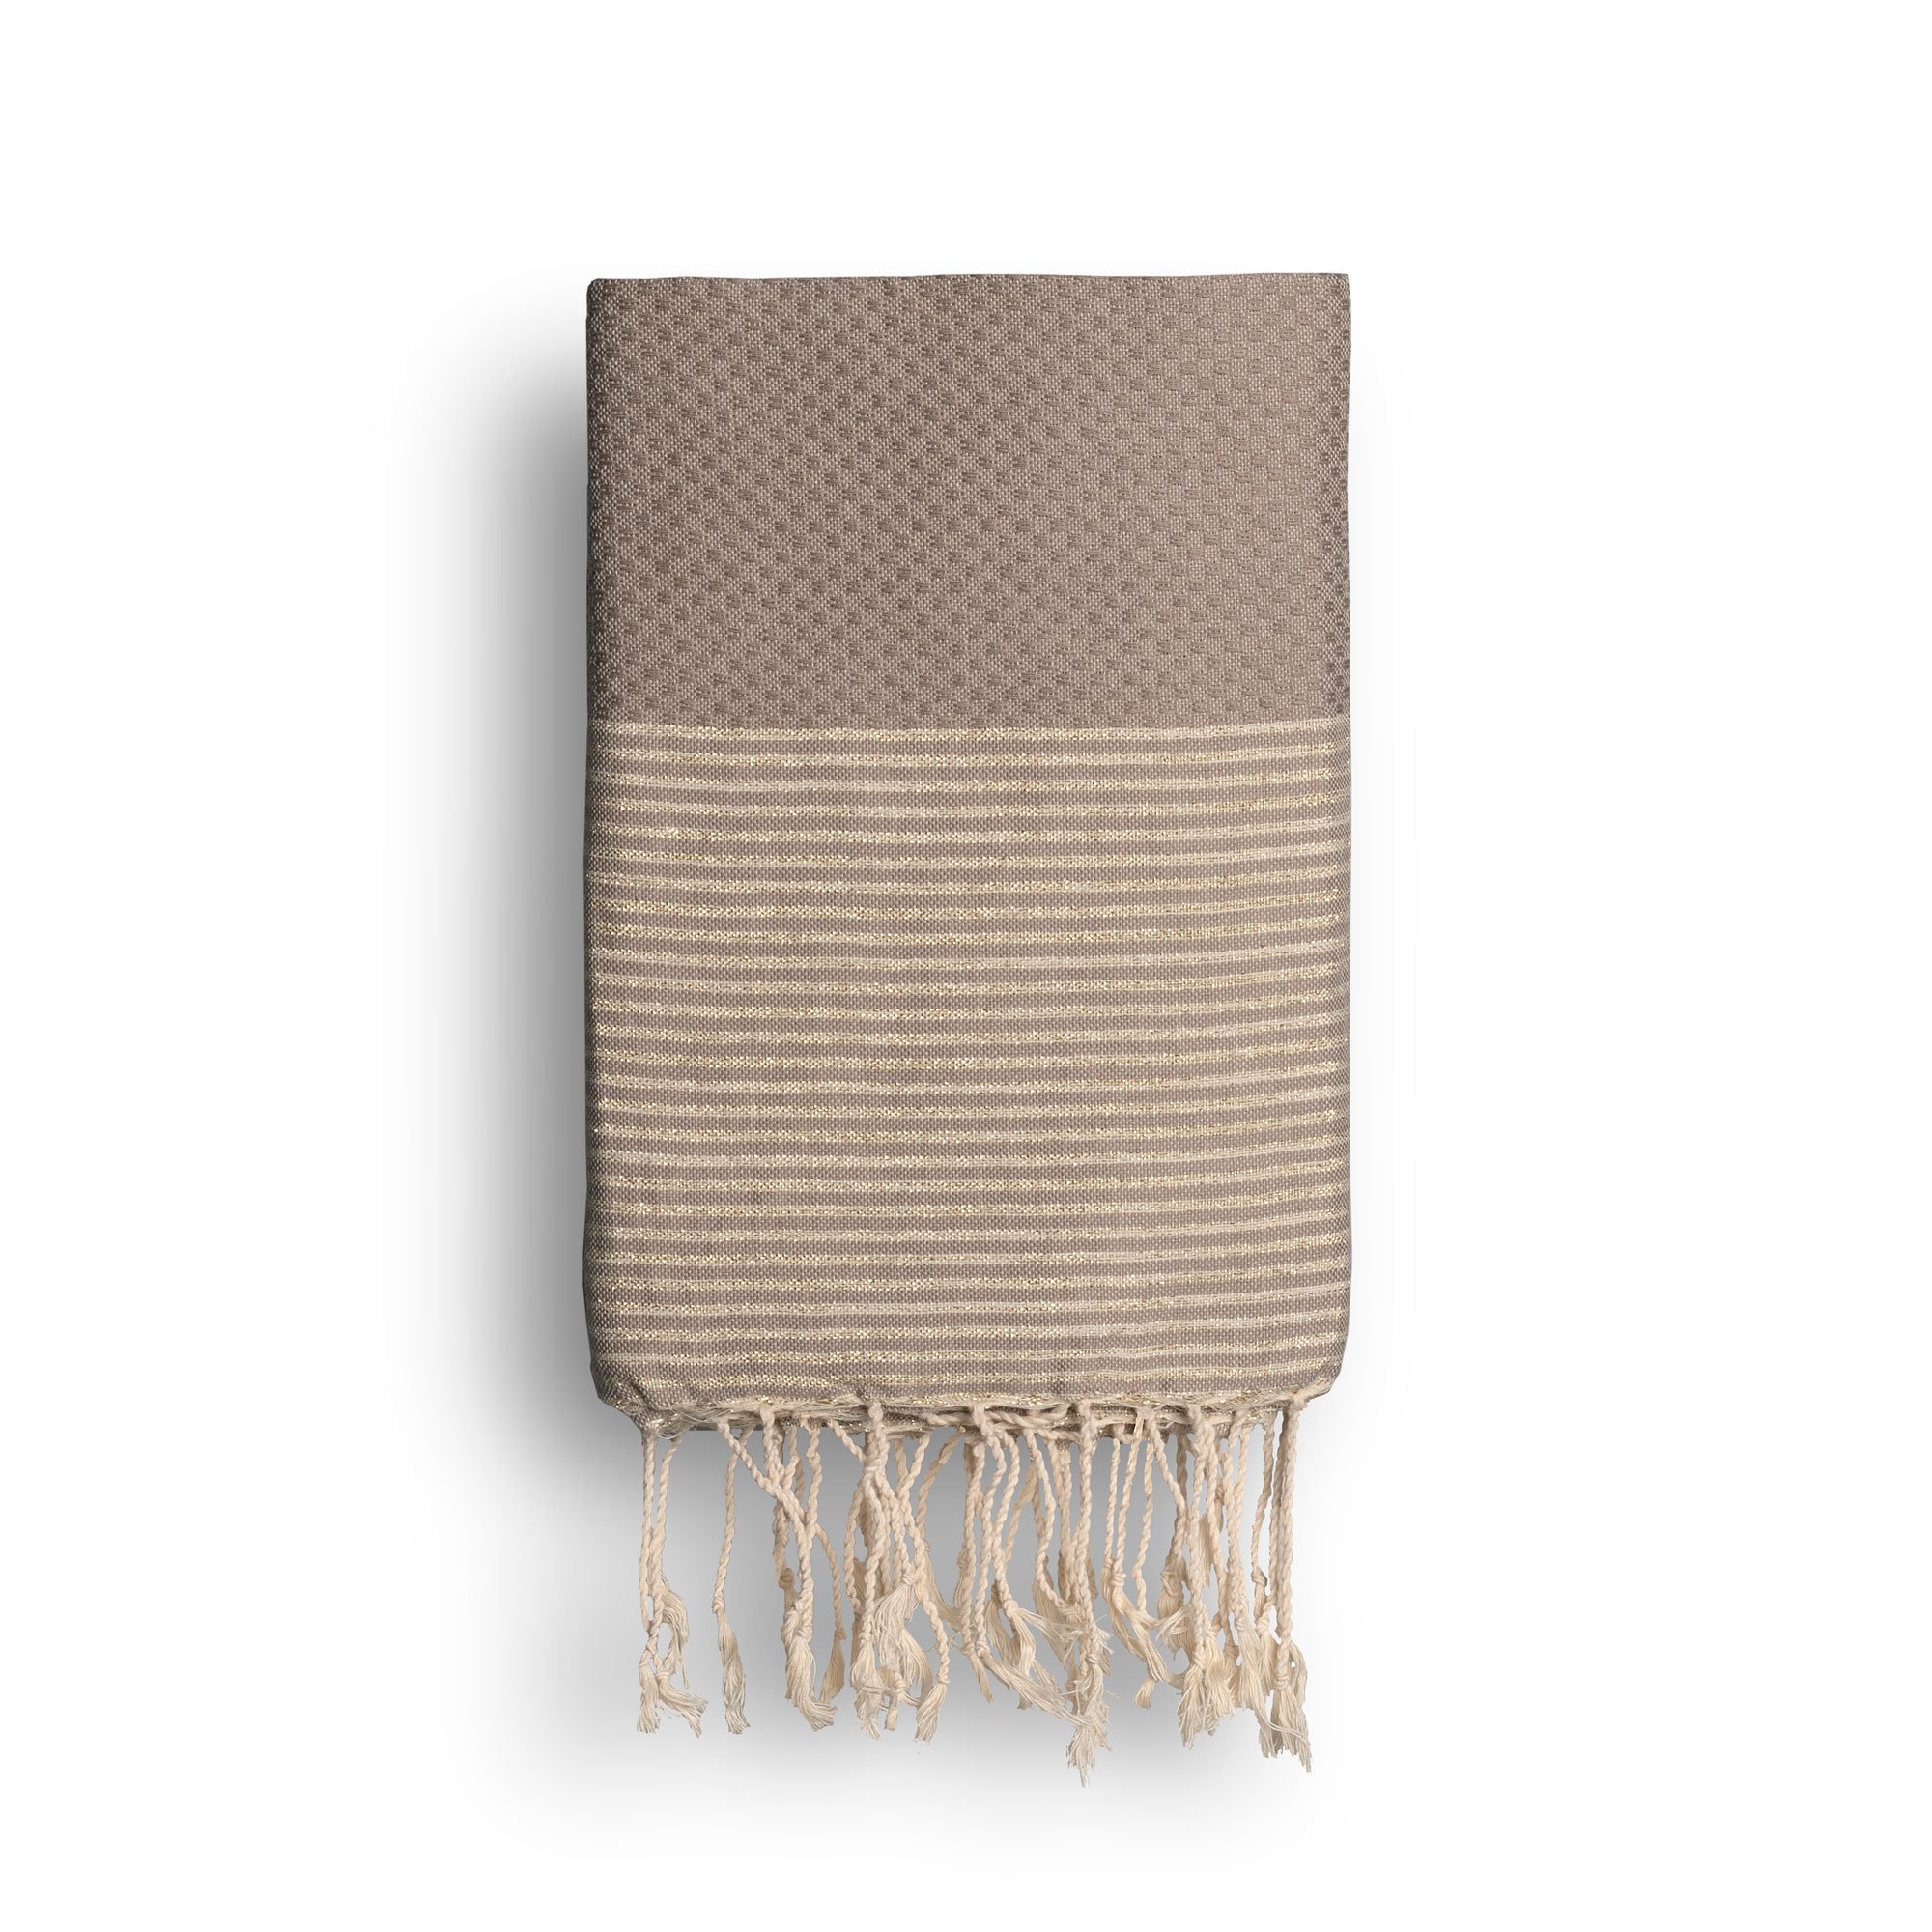 Cool-Fouta Hammam Towel Warm Taupe Honeycomb Fouta With Golden Lurex Stripes